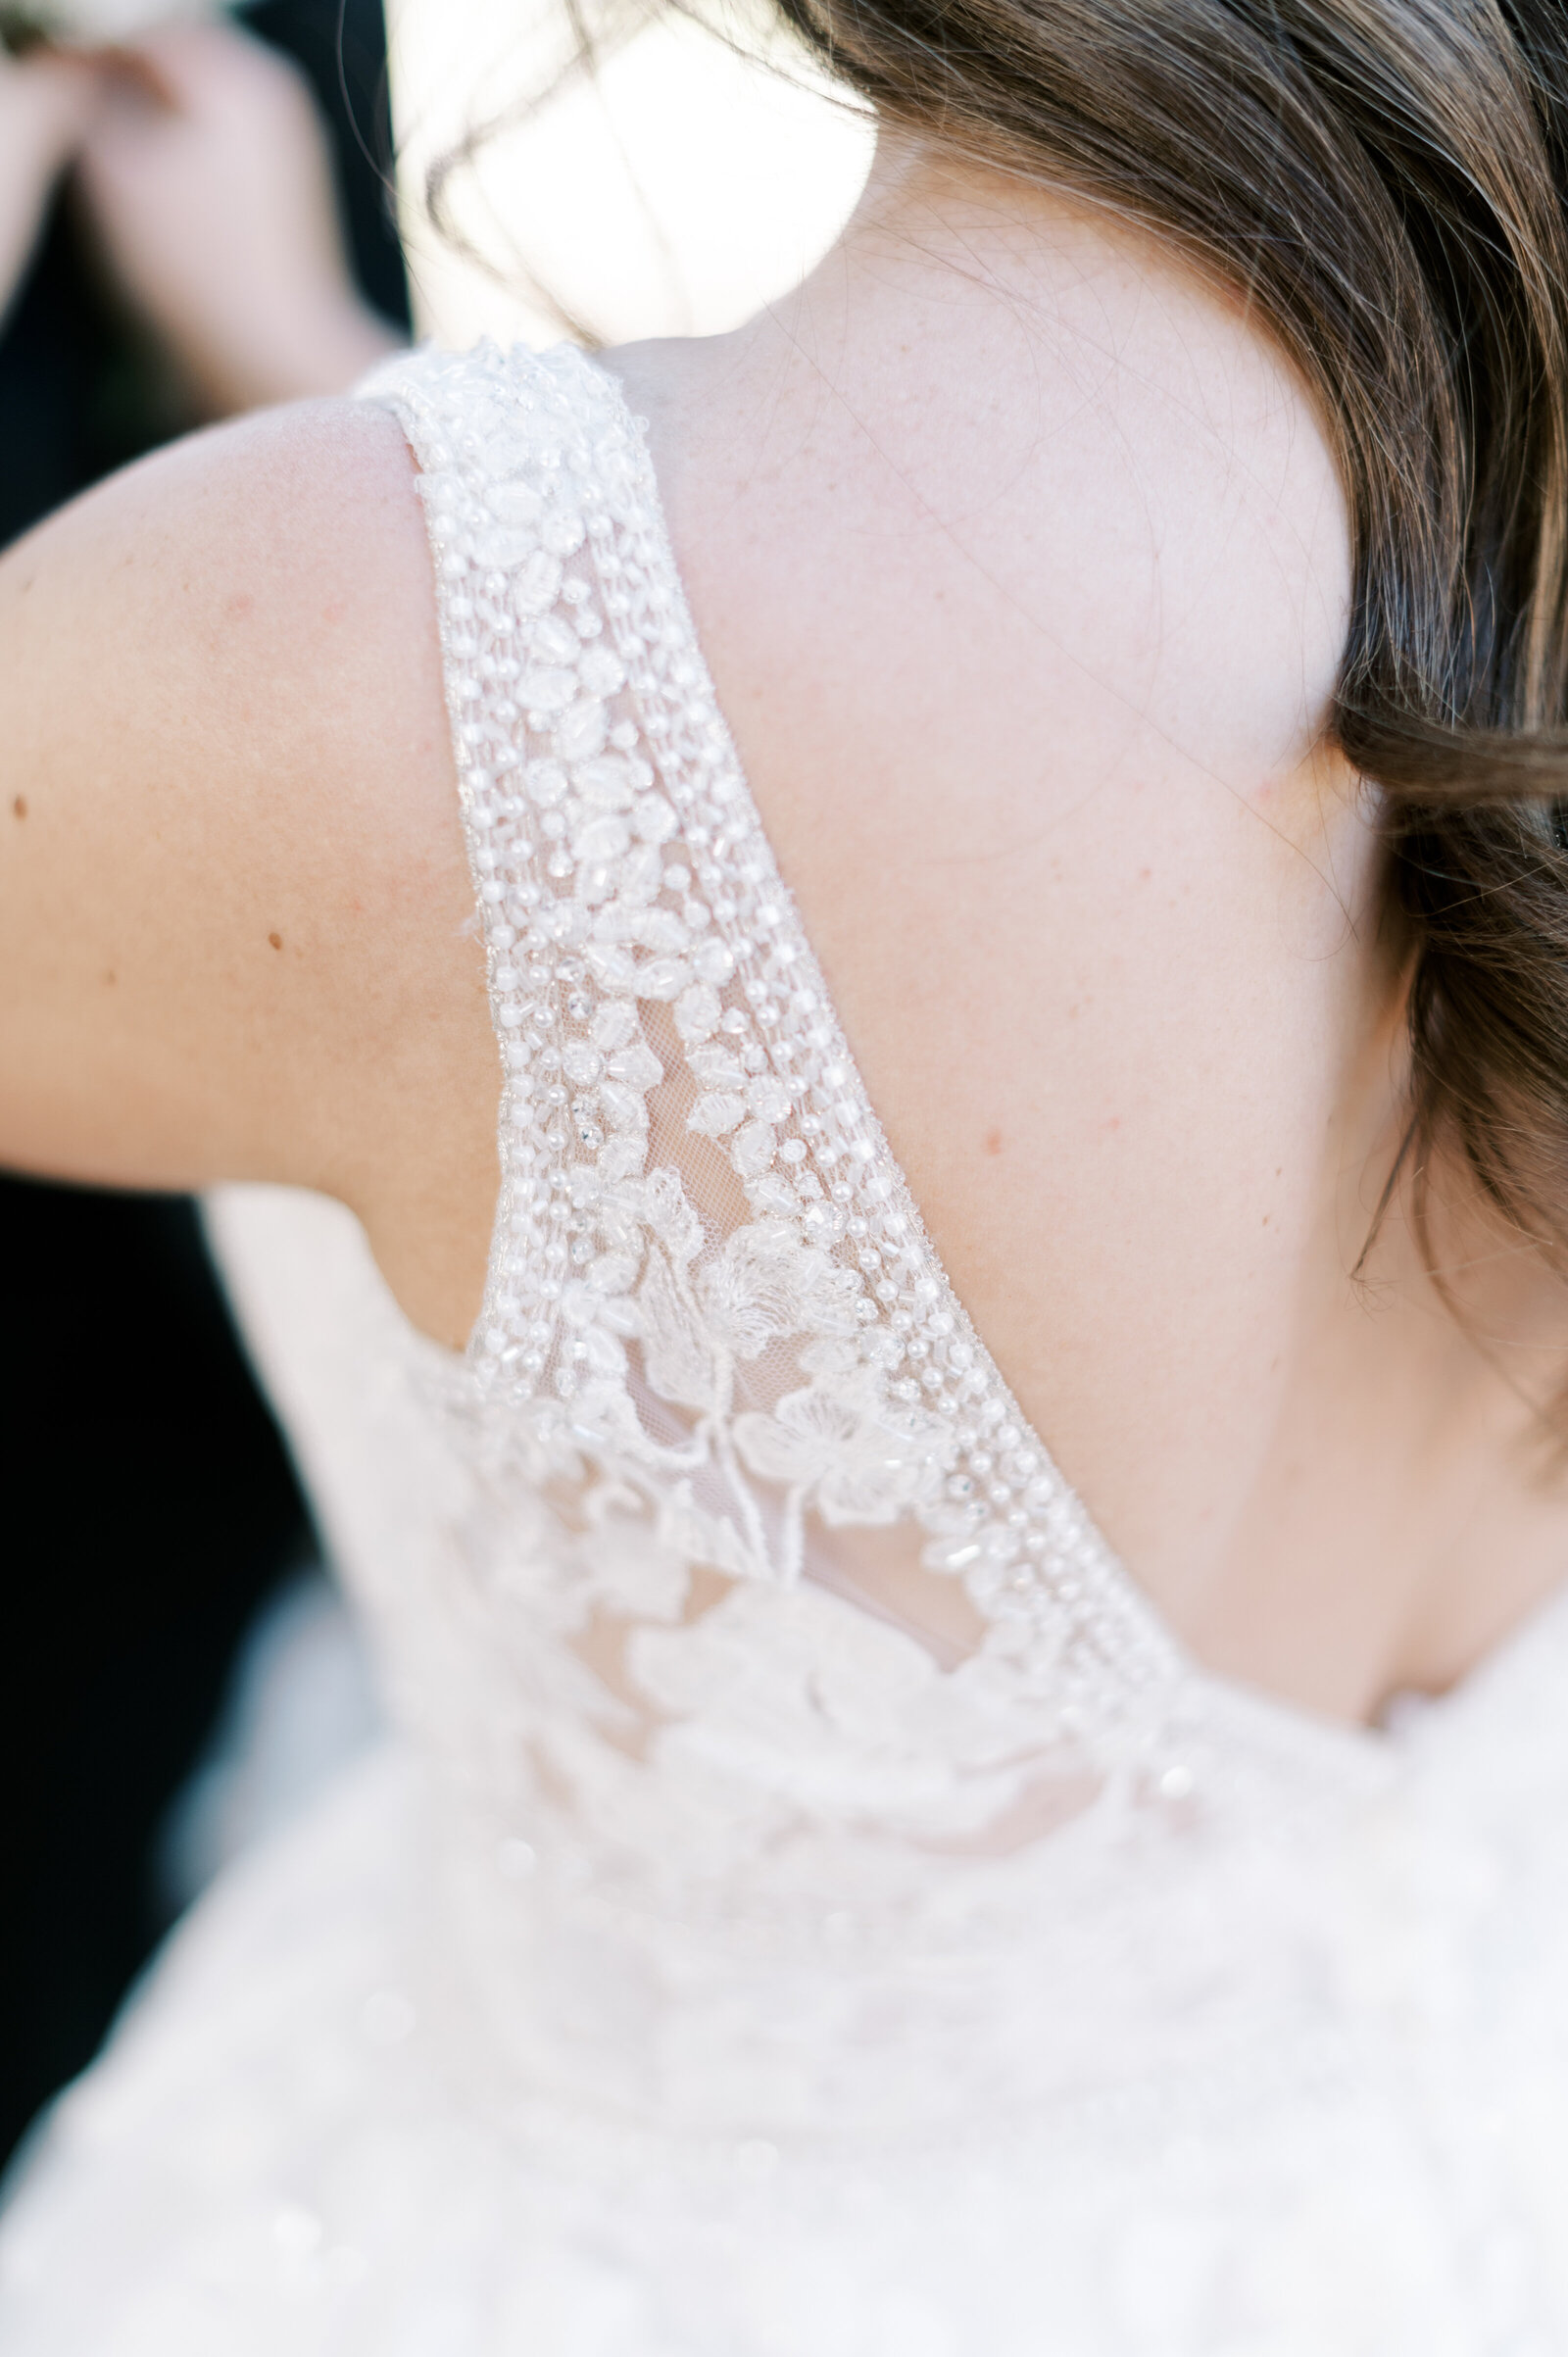 Boise wedding photography at Stone Crossing of bridal dress details